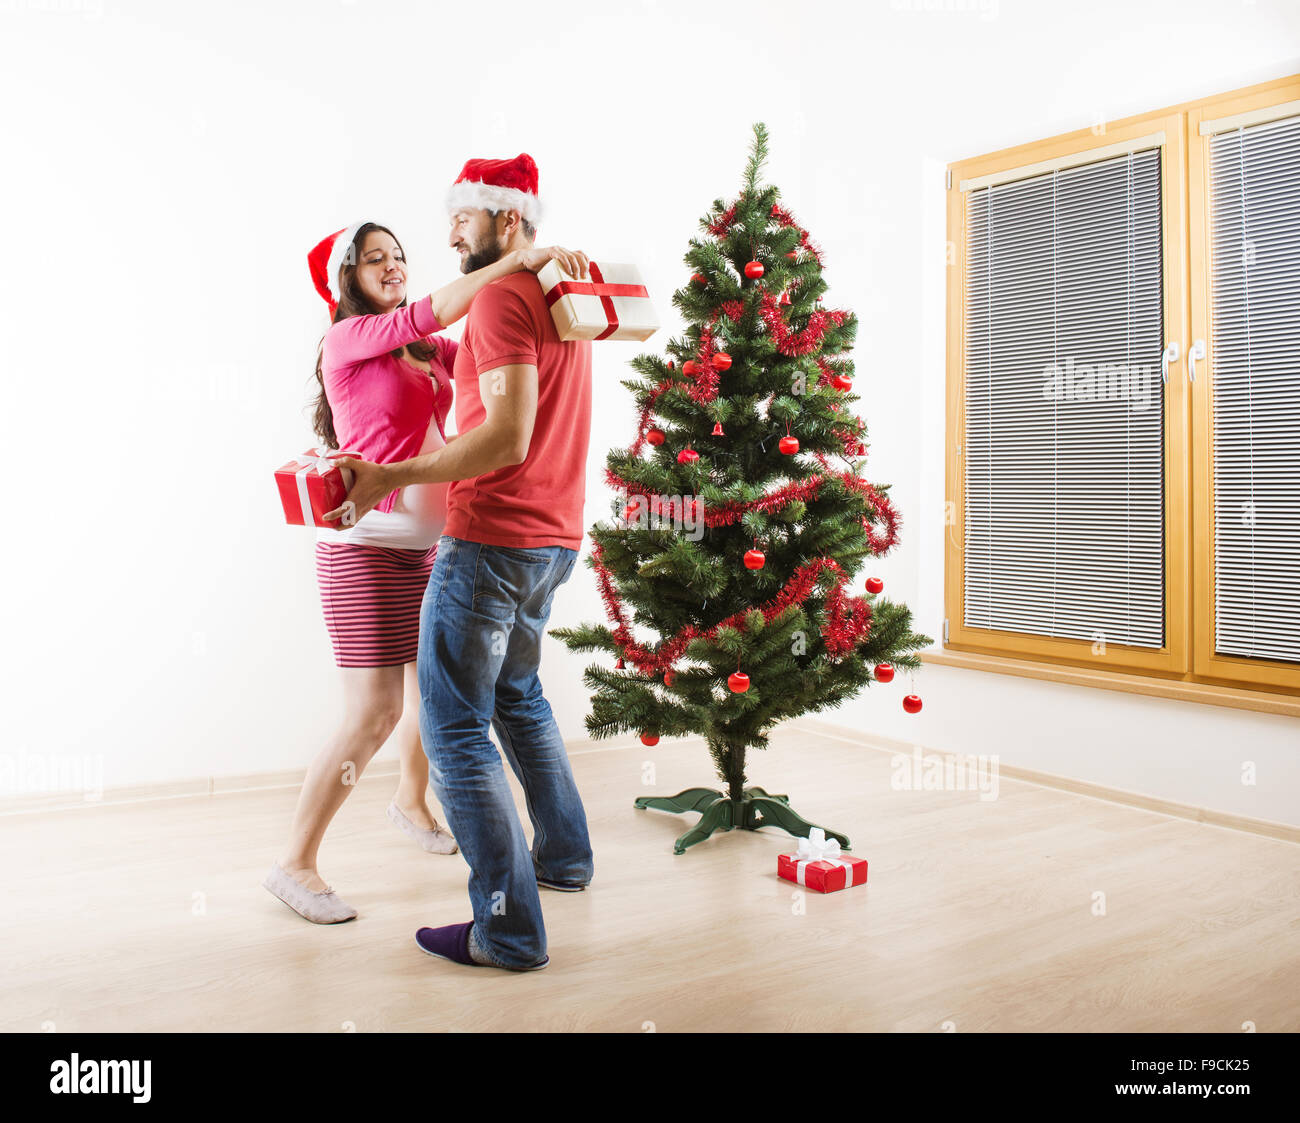 Young couple is dancing close to christmas tree. Woman is pregnant. Stock Photo